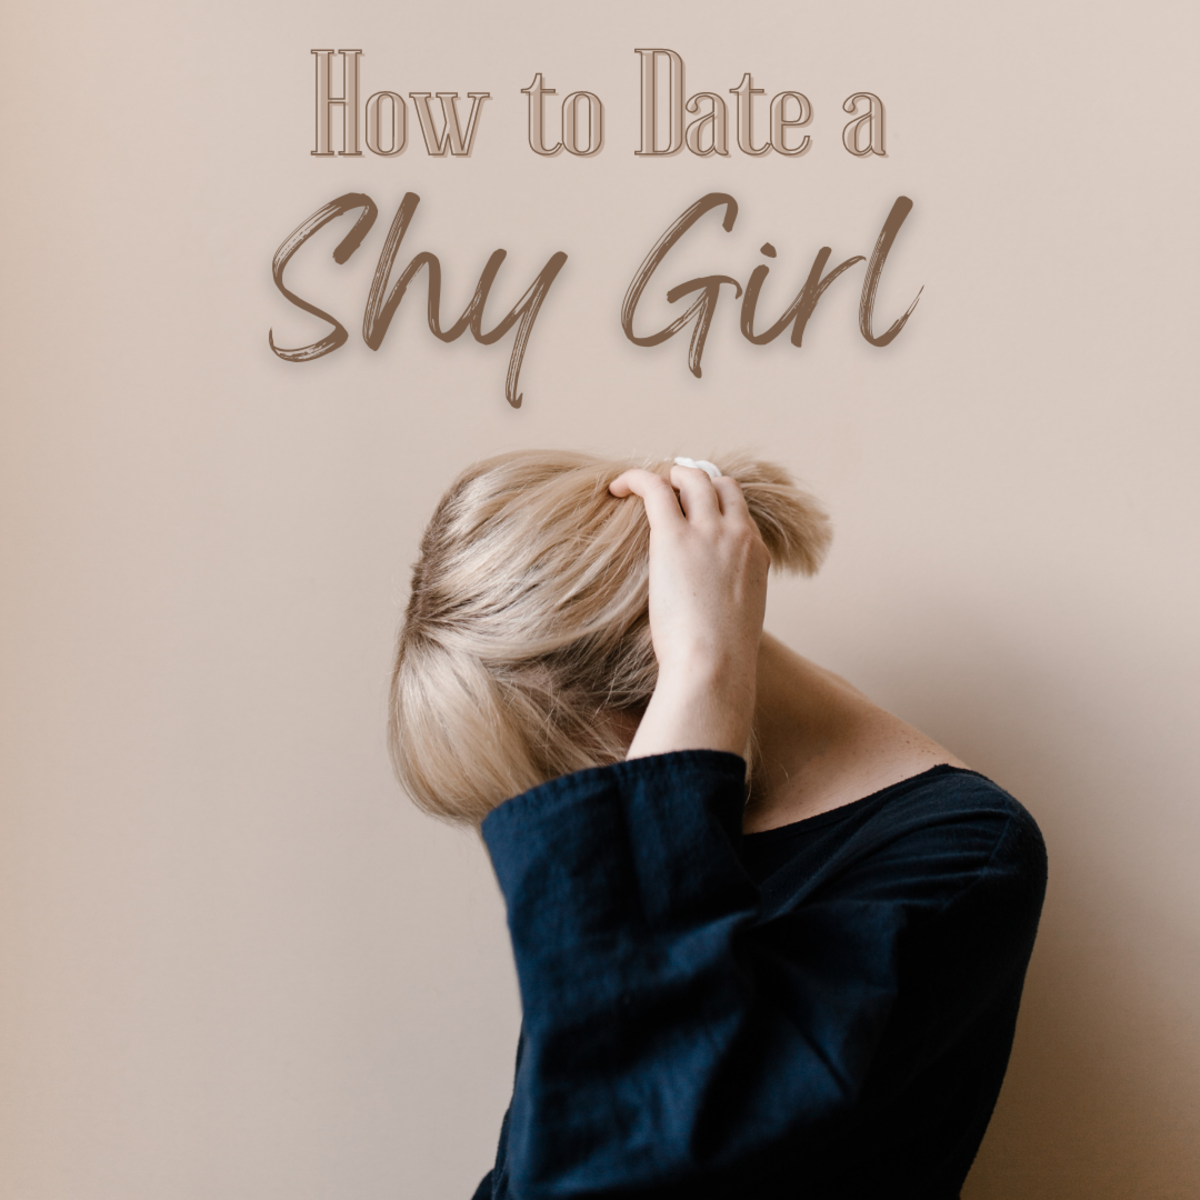 Tips for making a shy girl feel comfortable